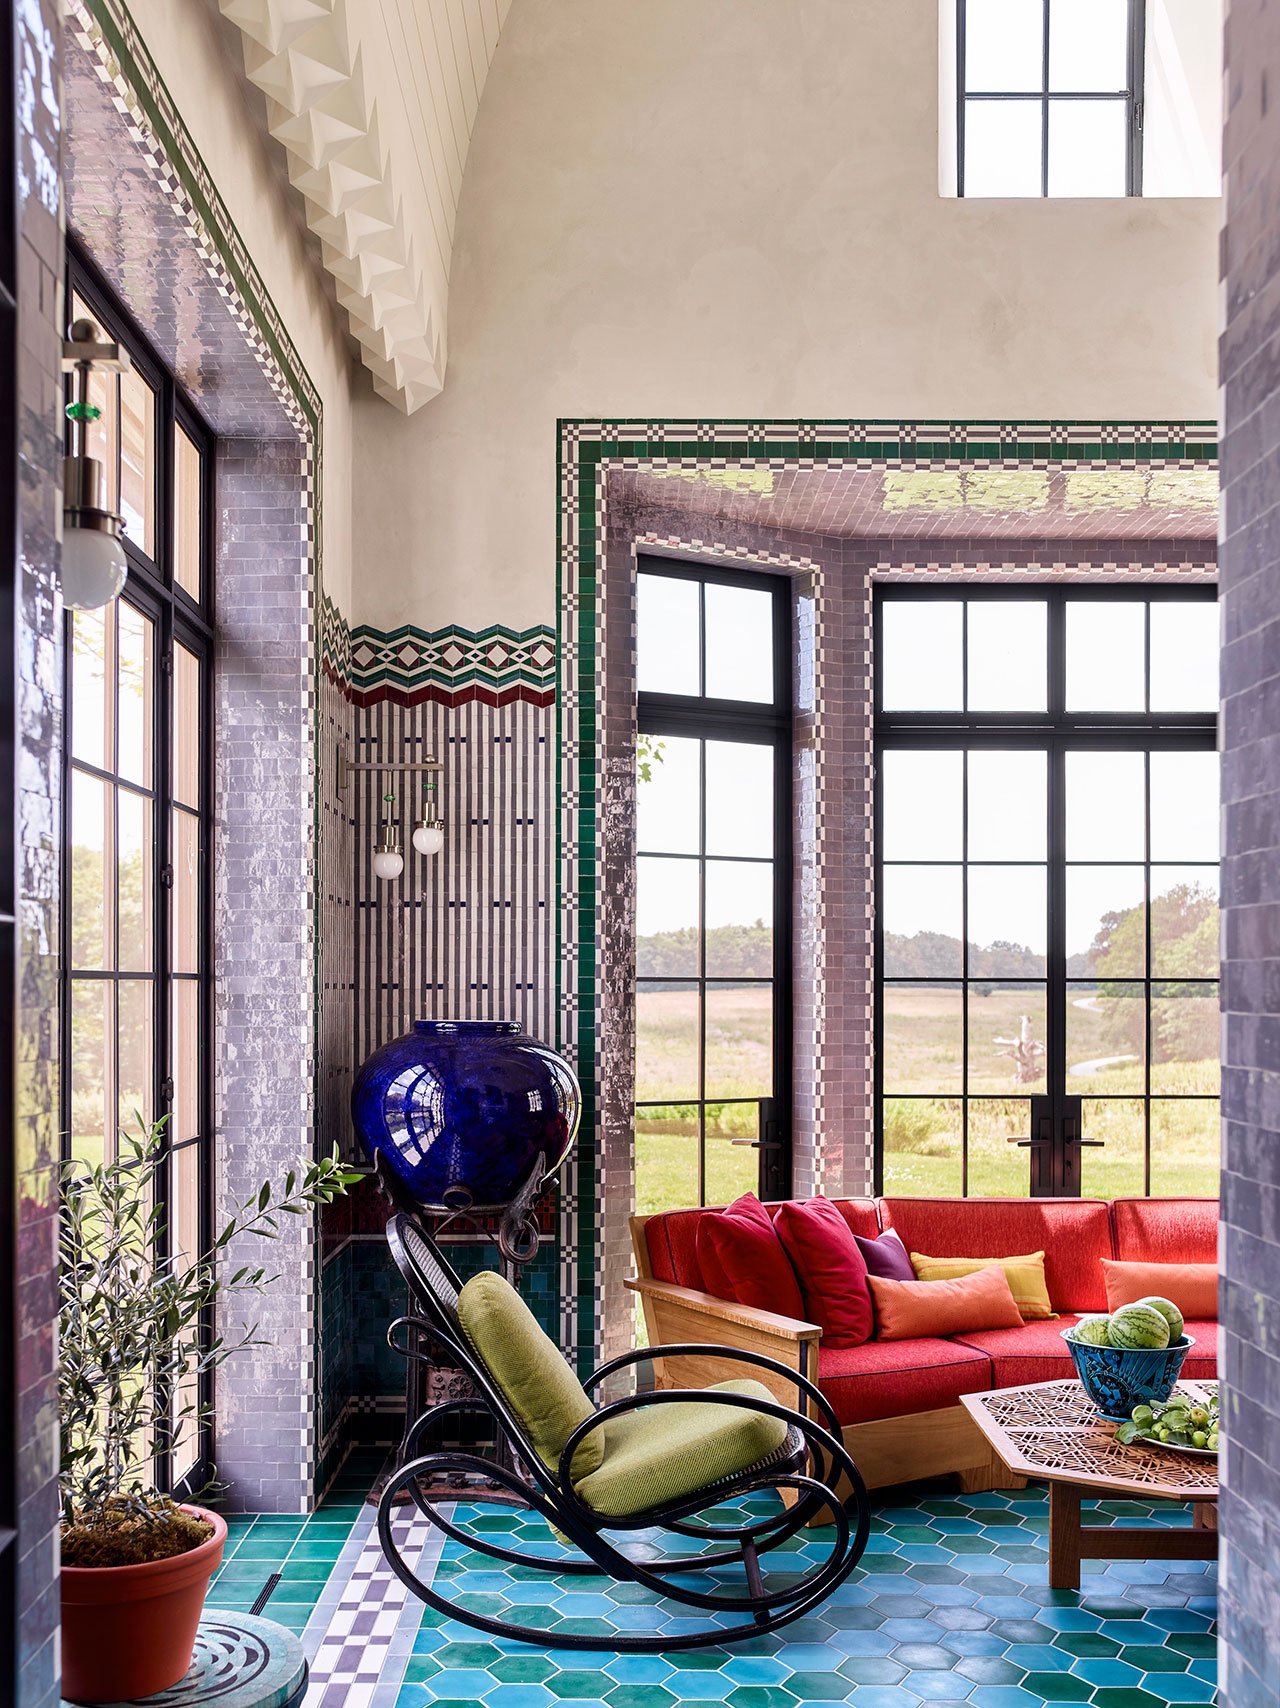 The walls of the screened porch are clad in green, burgundy, gray, and purple Moroccan zellige tiles in patterns inspired by the work of Koloman Moser and Joseph Urban.
Photography by Eric Piasecki.